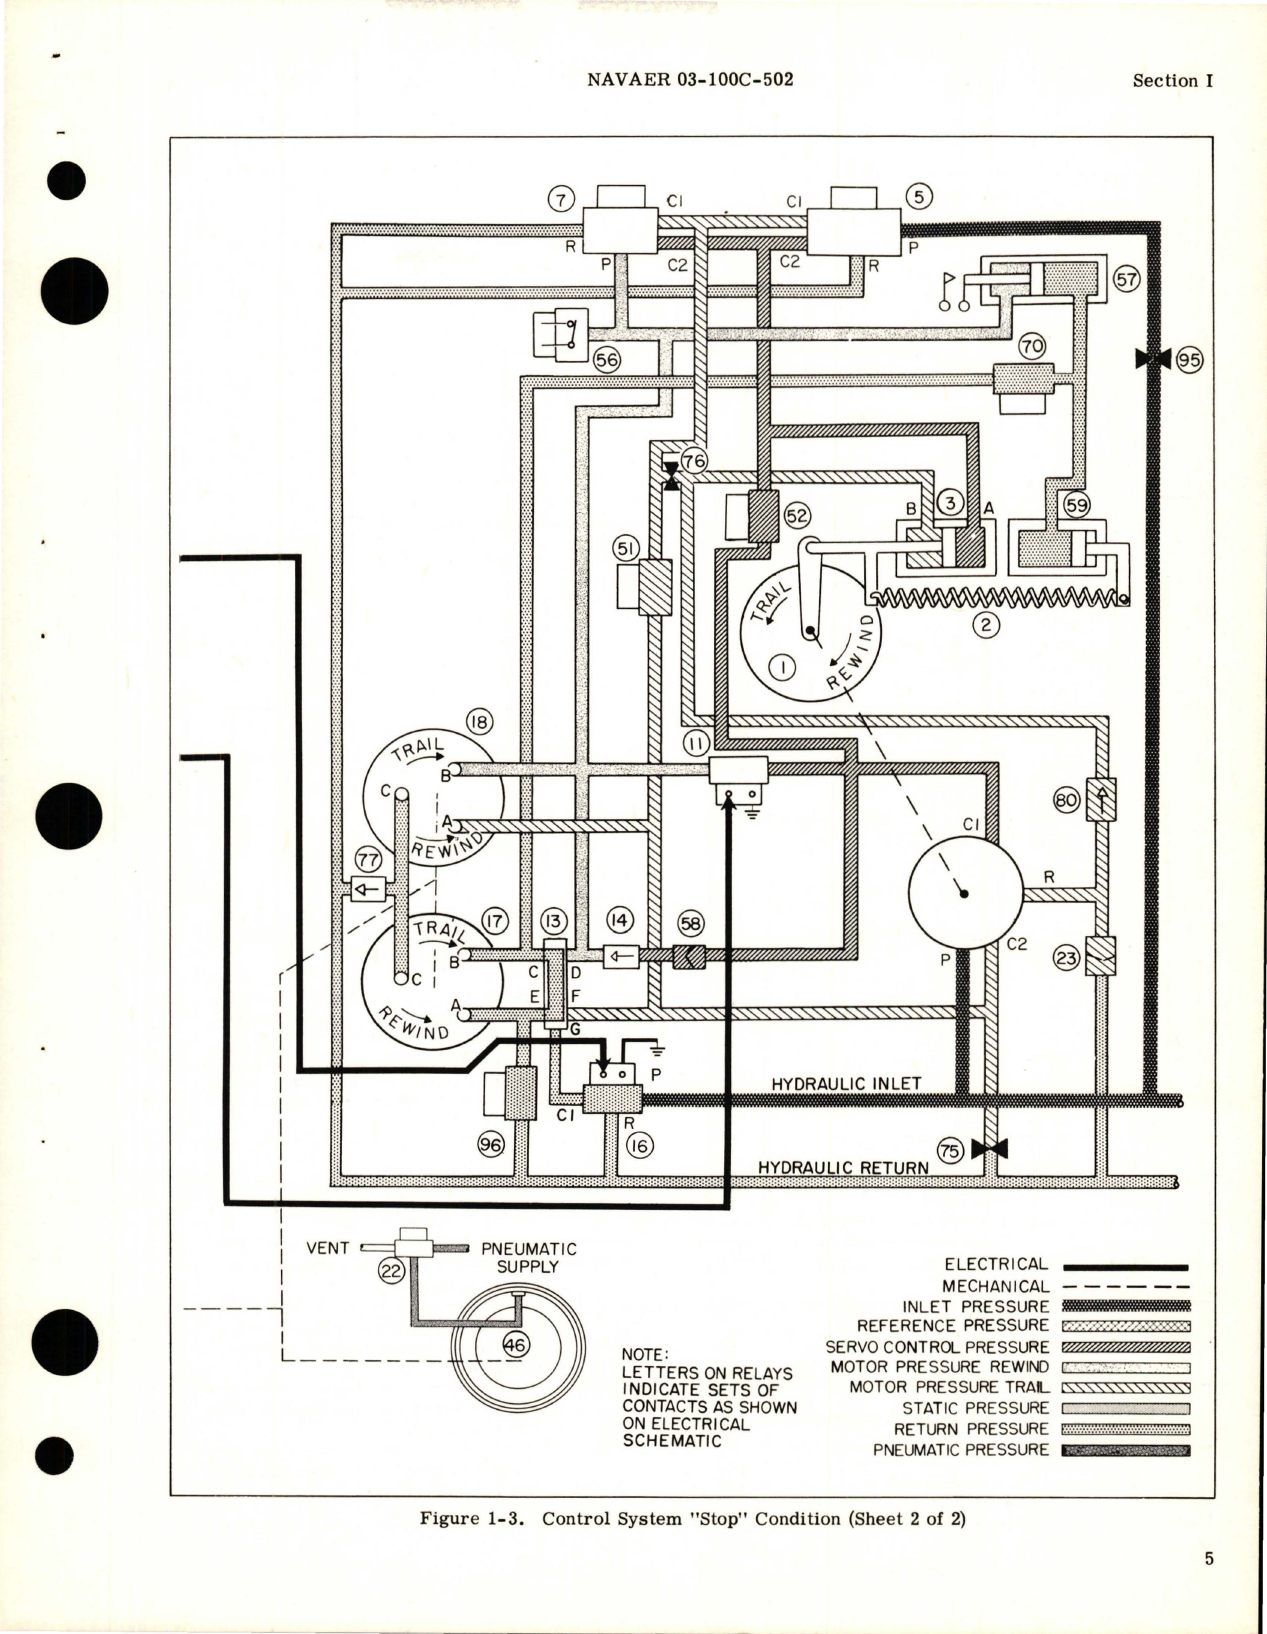 Sample page 9 from AirCorps Library document: Operation and Maintenance Instructions for Inflight Refueling Hose Reel Assembly - Model FR250 